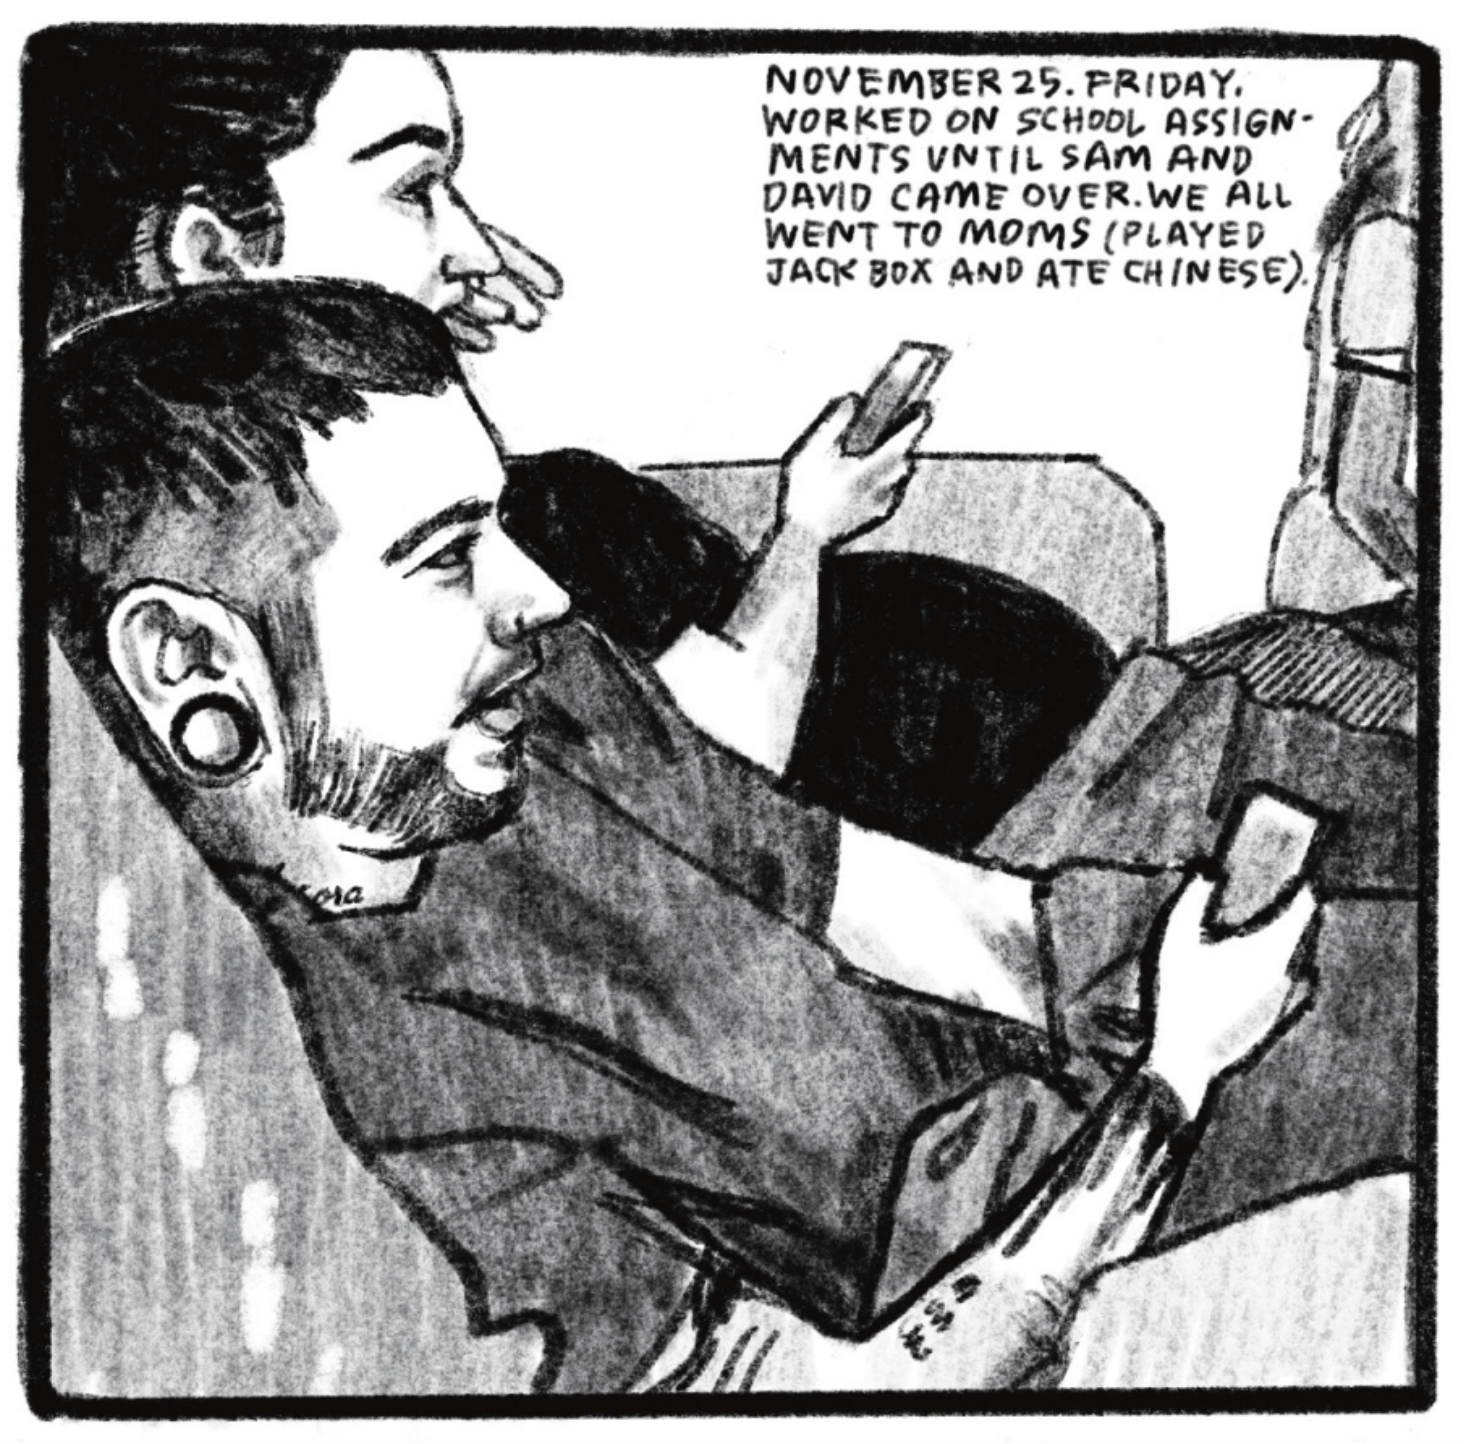 Two people are lounging back on a couch, holding remote controllers and looking ahead, presumably at a TV or monitor. One of them has tattoos, gauges, a nose ring, and facial hair; the other has their hair tied back in a ponytail. Someone is in the background, possibly Kim or her mom, heading off-panel. â€œNovember 25. Friday. Worked on school assignments until 5 a.m. and David came over. We all went to momâ€™s (played Jackbox and ate Chinese).â€